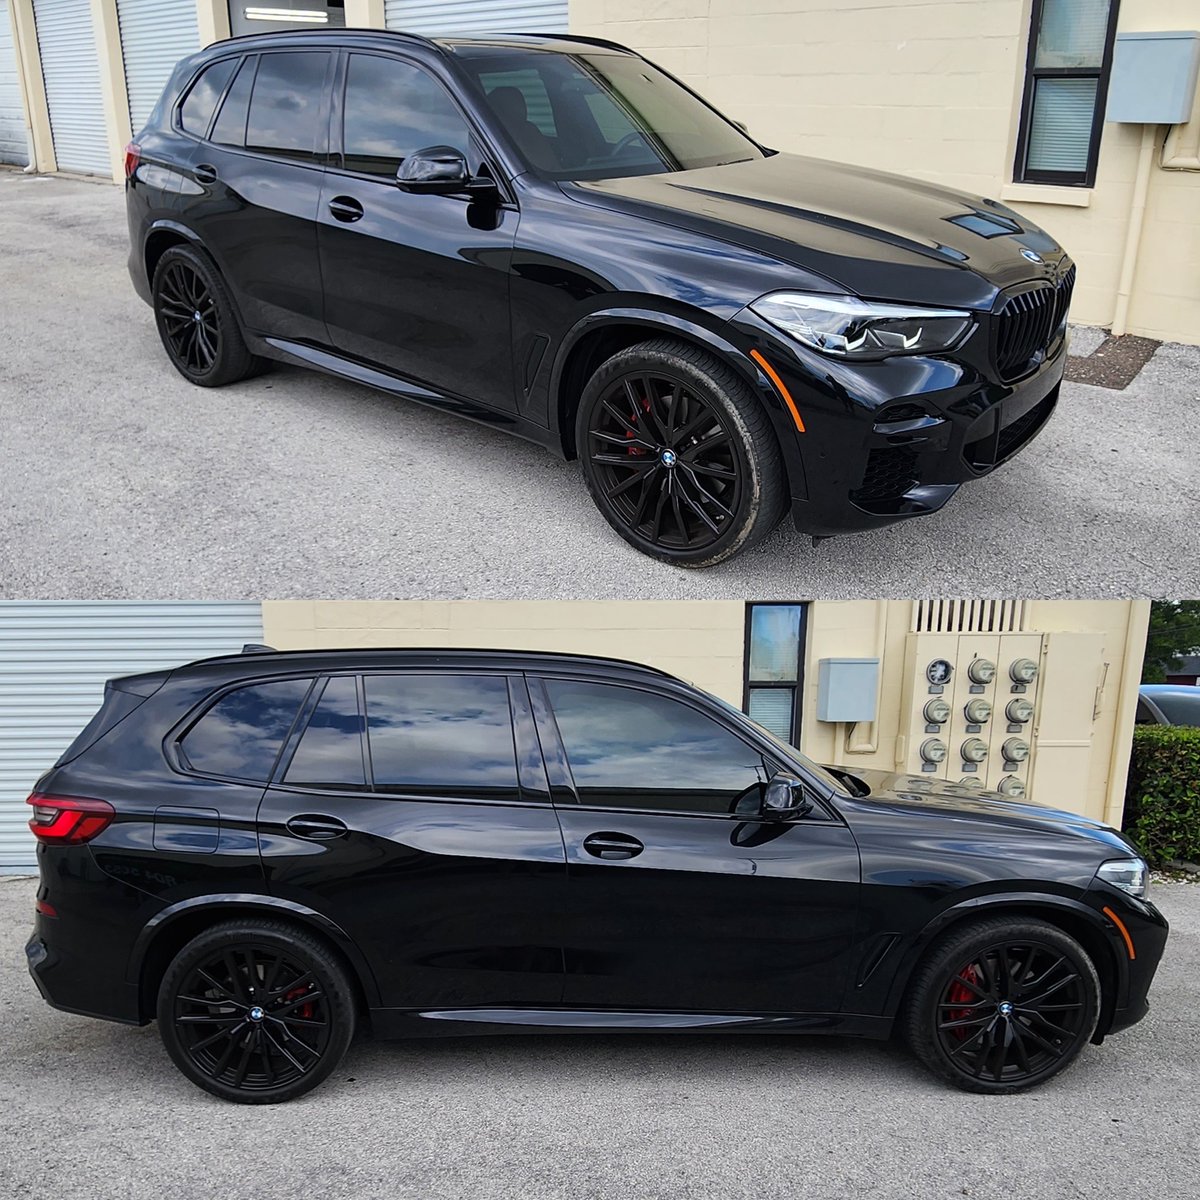 2022 BMW X5. Installed @llumarfilms Ceramic Infrared IRX Series Film on the front doors and full windshield
By Appointment Only
Booking Info Call/Text 321.396.2182
📍Servicing Clearwater & Surrounding Areas
#bmw #x5 #bmwx5 #suv #luxury #supercar #llumar #tint #tinting #windowtint